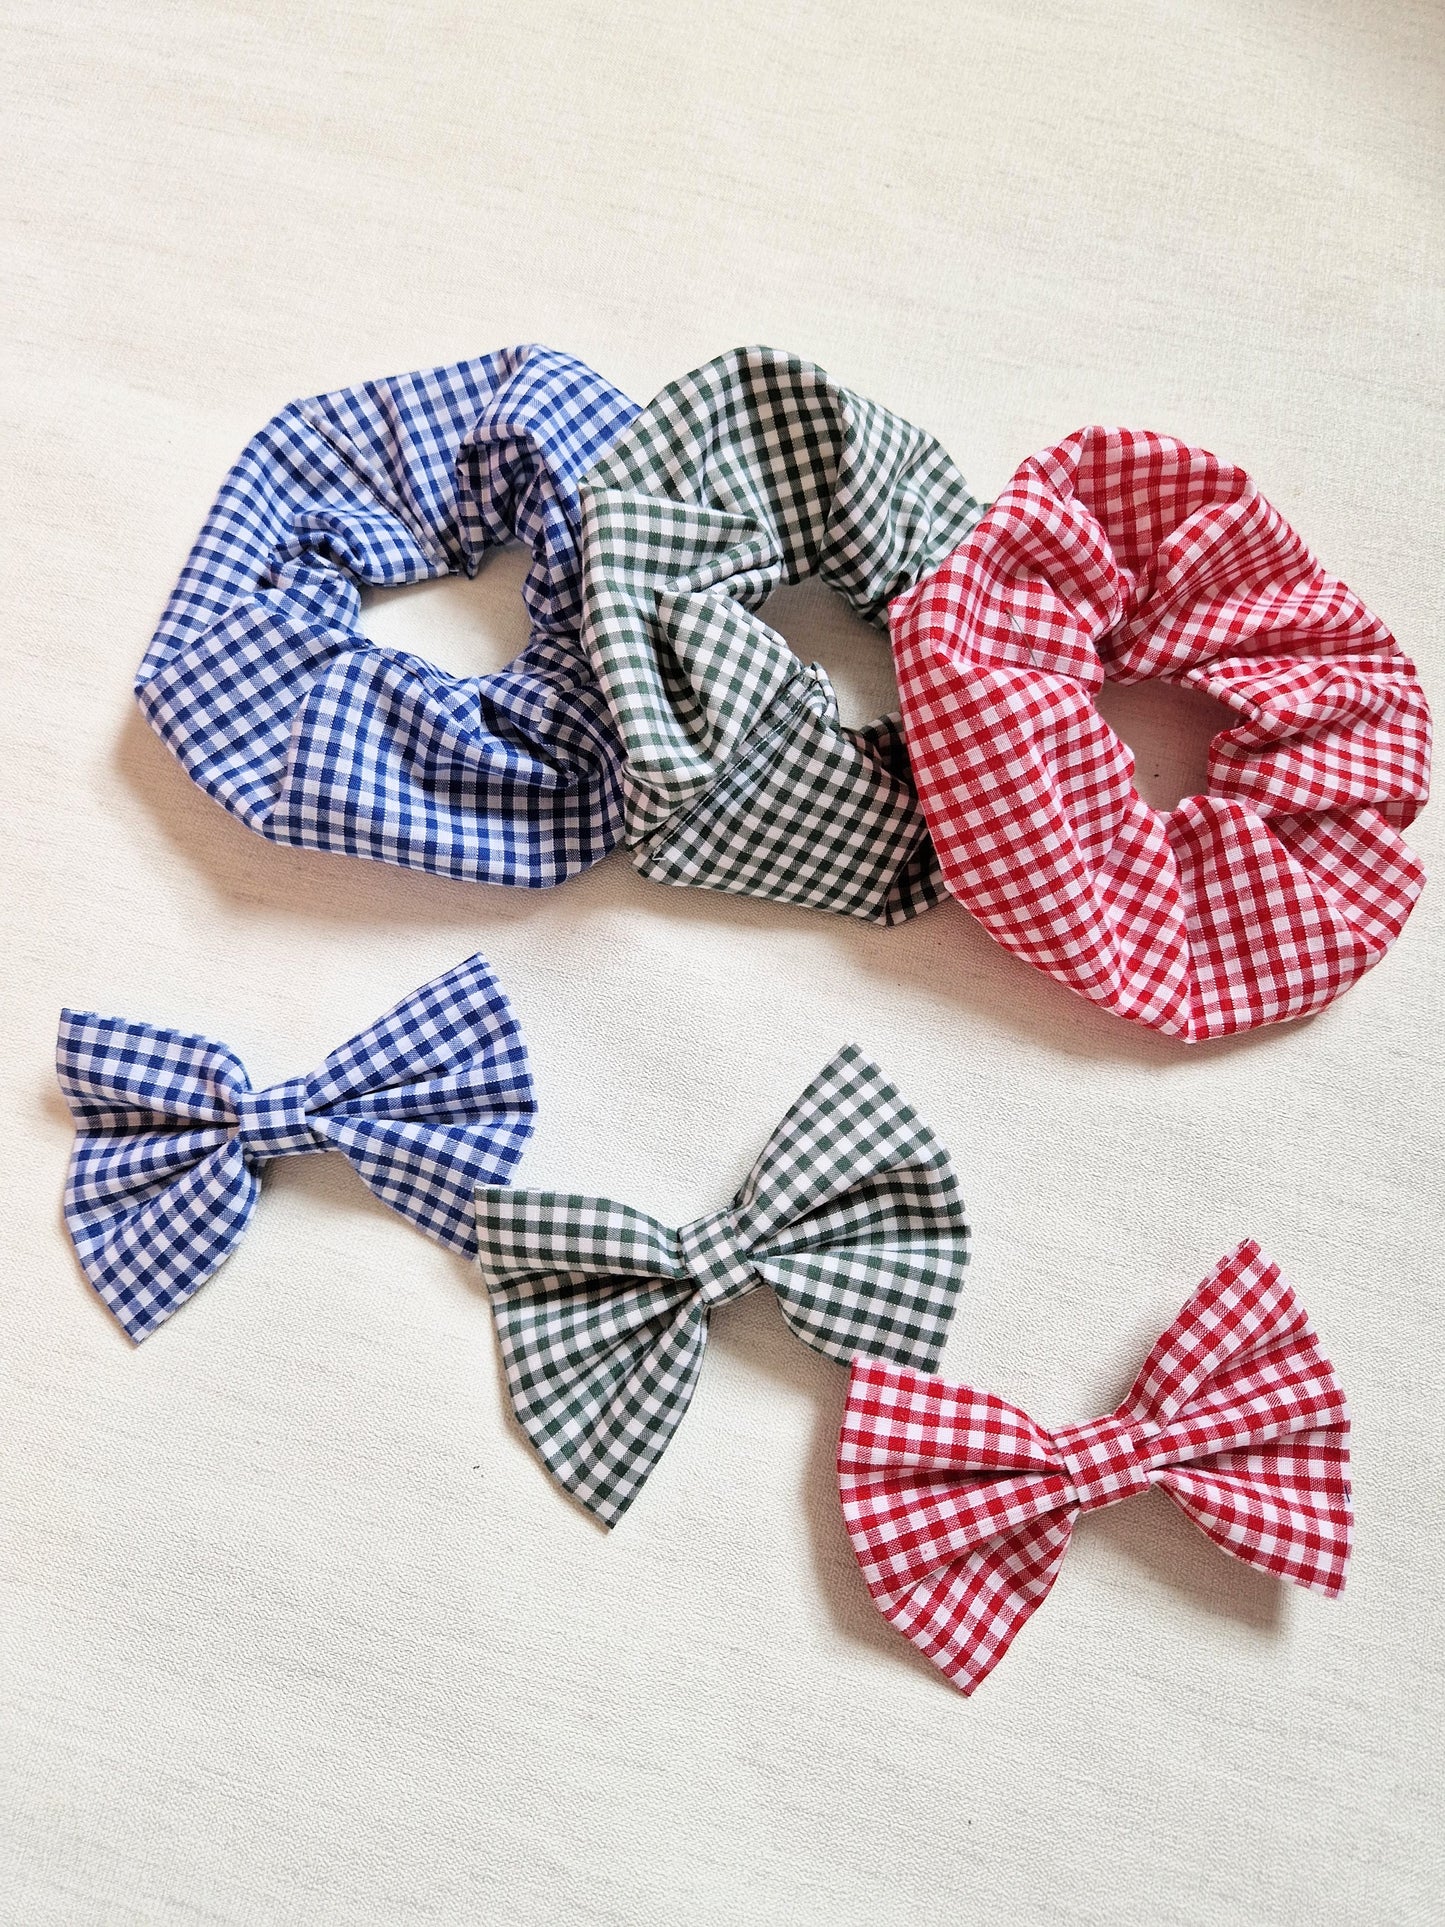 Back to school hair bows